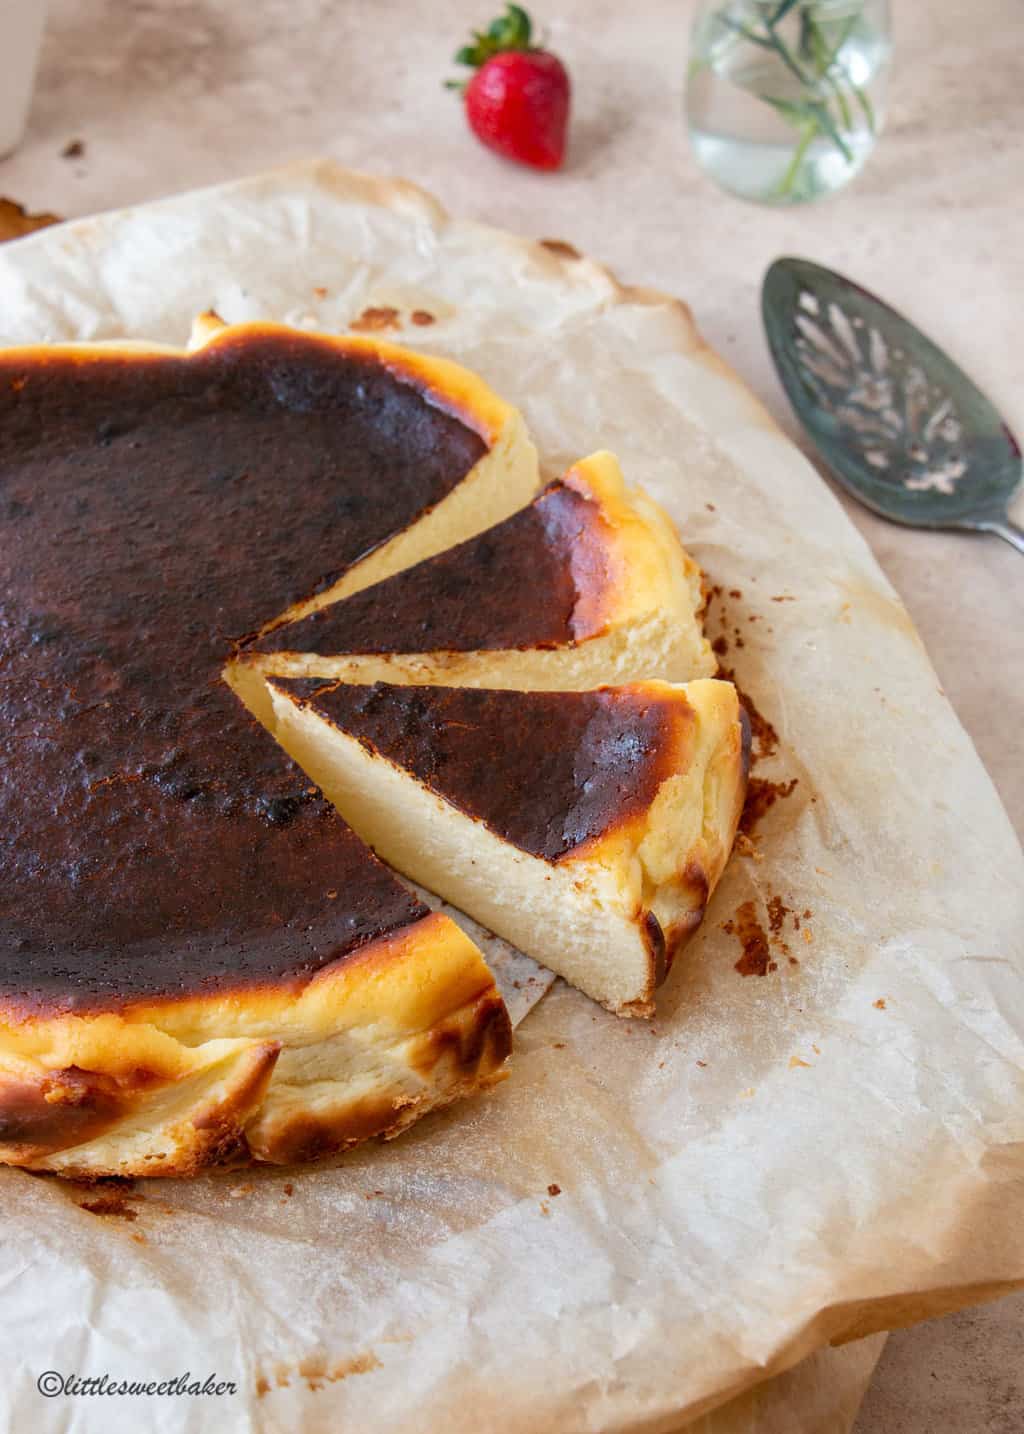 BASQUE BURNT CHEESECAKE WITH MISO - Proper FoodProper Food